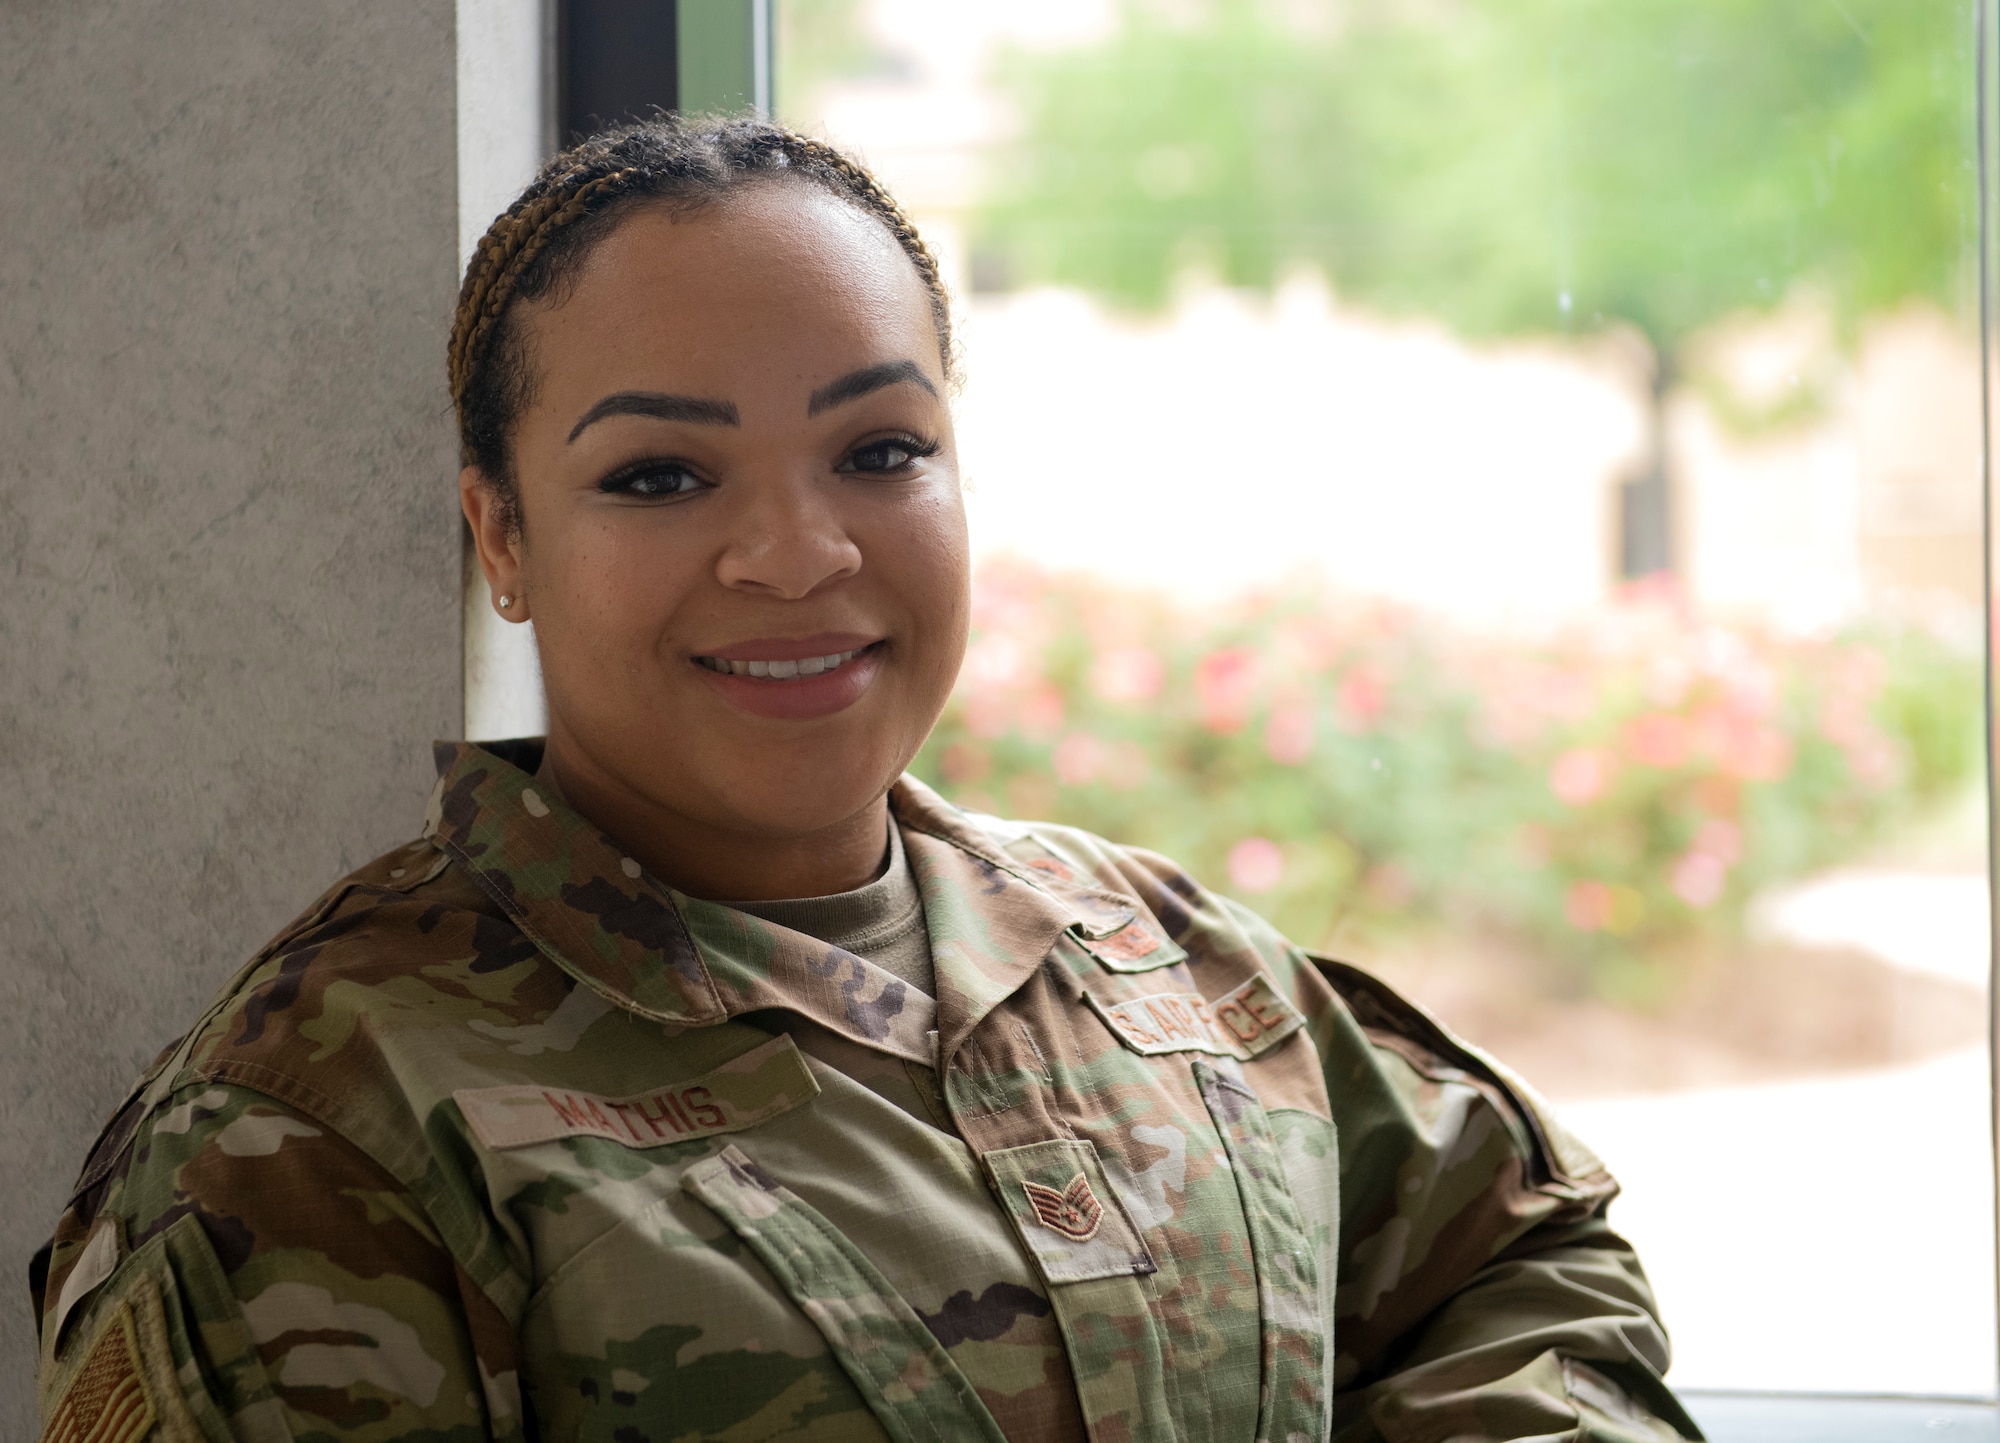 Staff Sgt. Shakira Mathis poses for a photo at Maxwell Air Force Base, Alabama, April 26, 2022. Mathis was able to save a life due to her training in Self Aid Buddy Care.